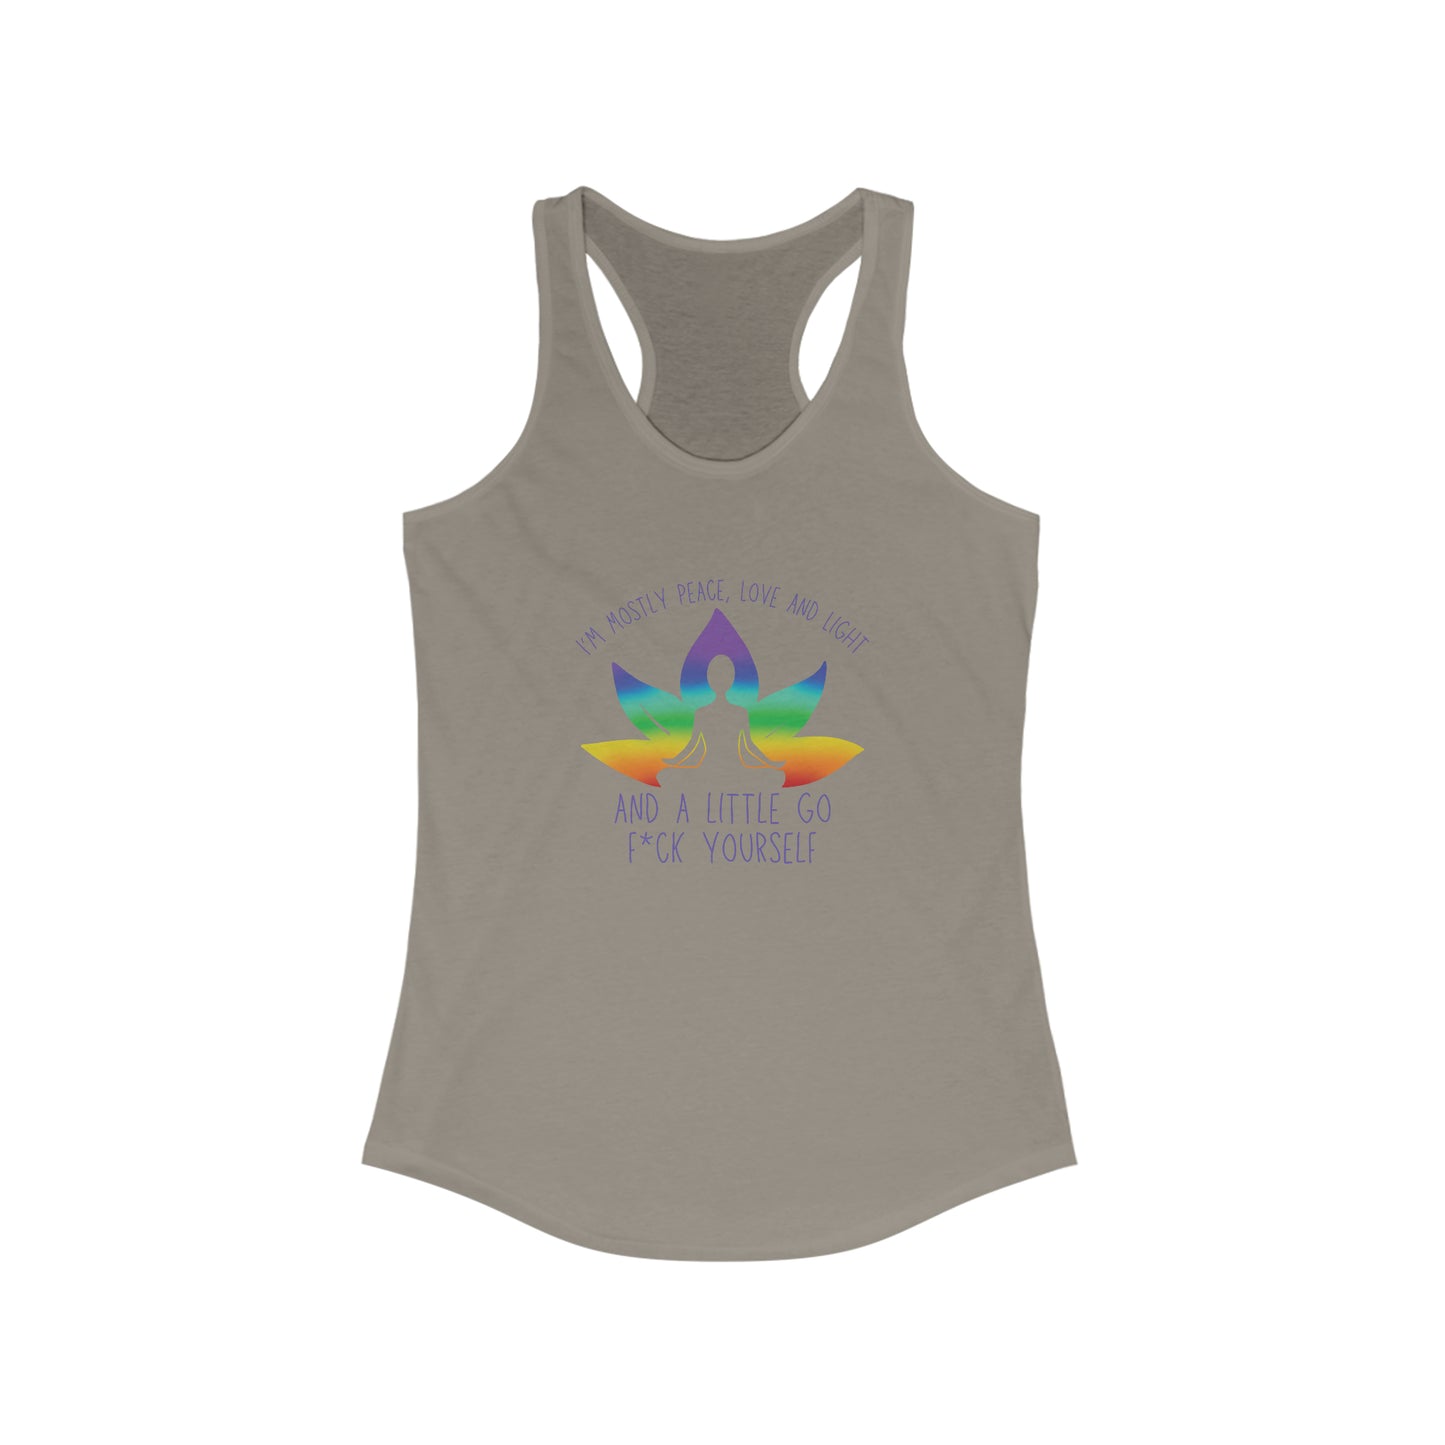 Mostly peace and love - Yoga Inspired Tank Top